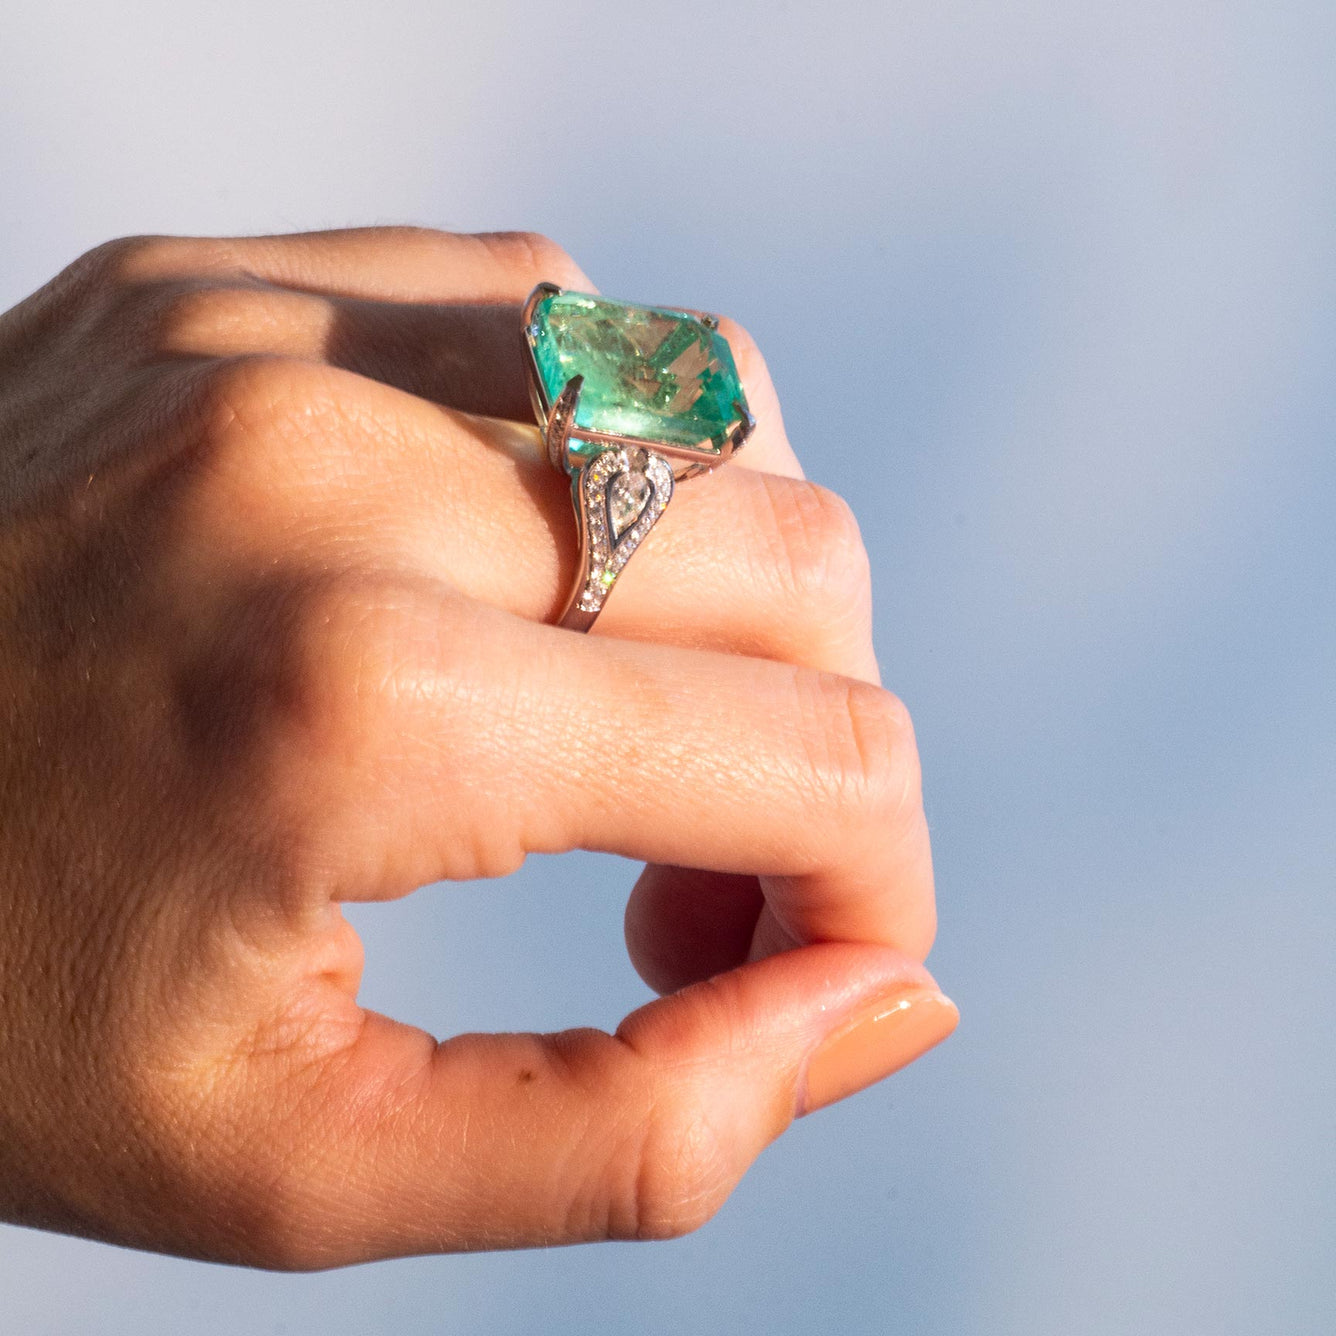 Pre-Loved/Second Hand Emerald Jewellery - Weeping Grace